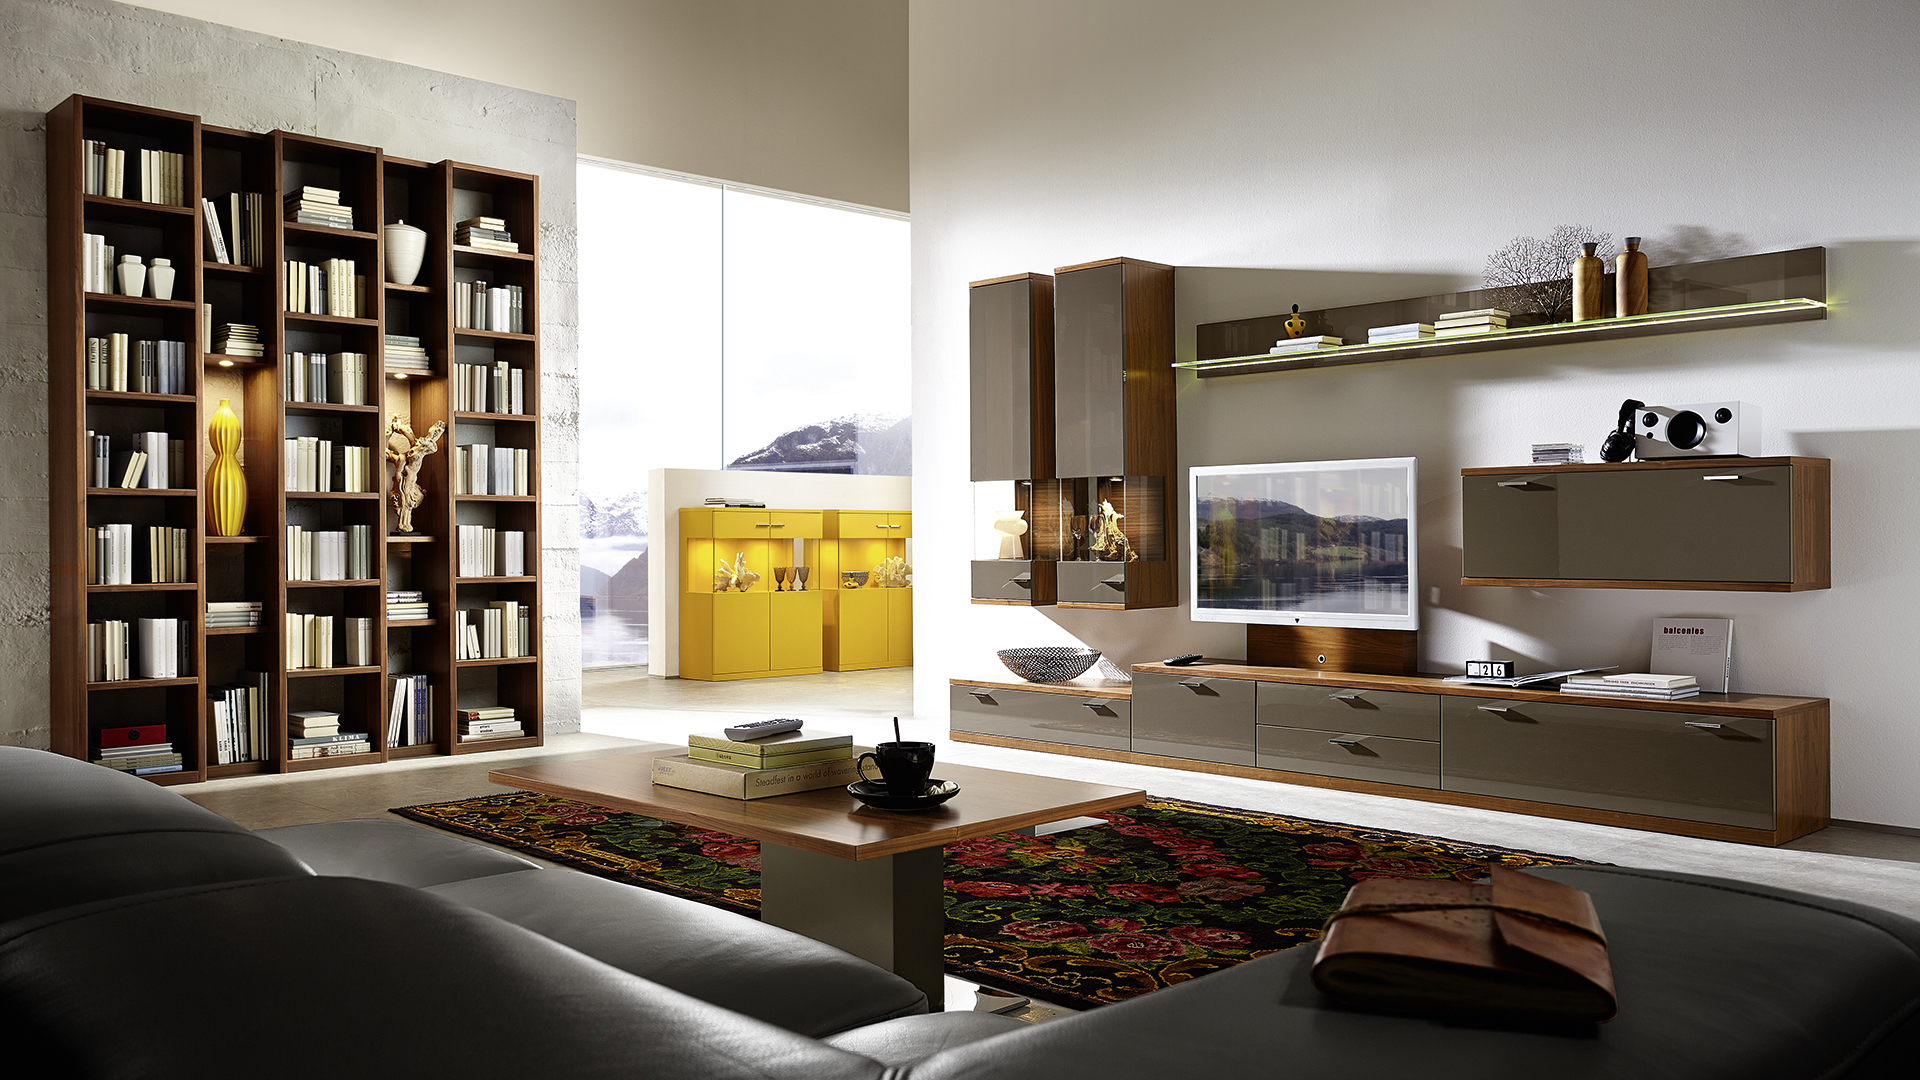 Modular system for designing a book storage area in the living room